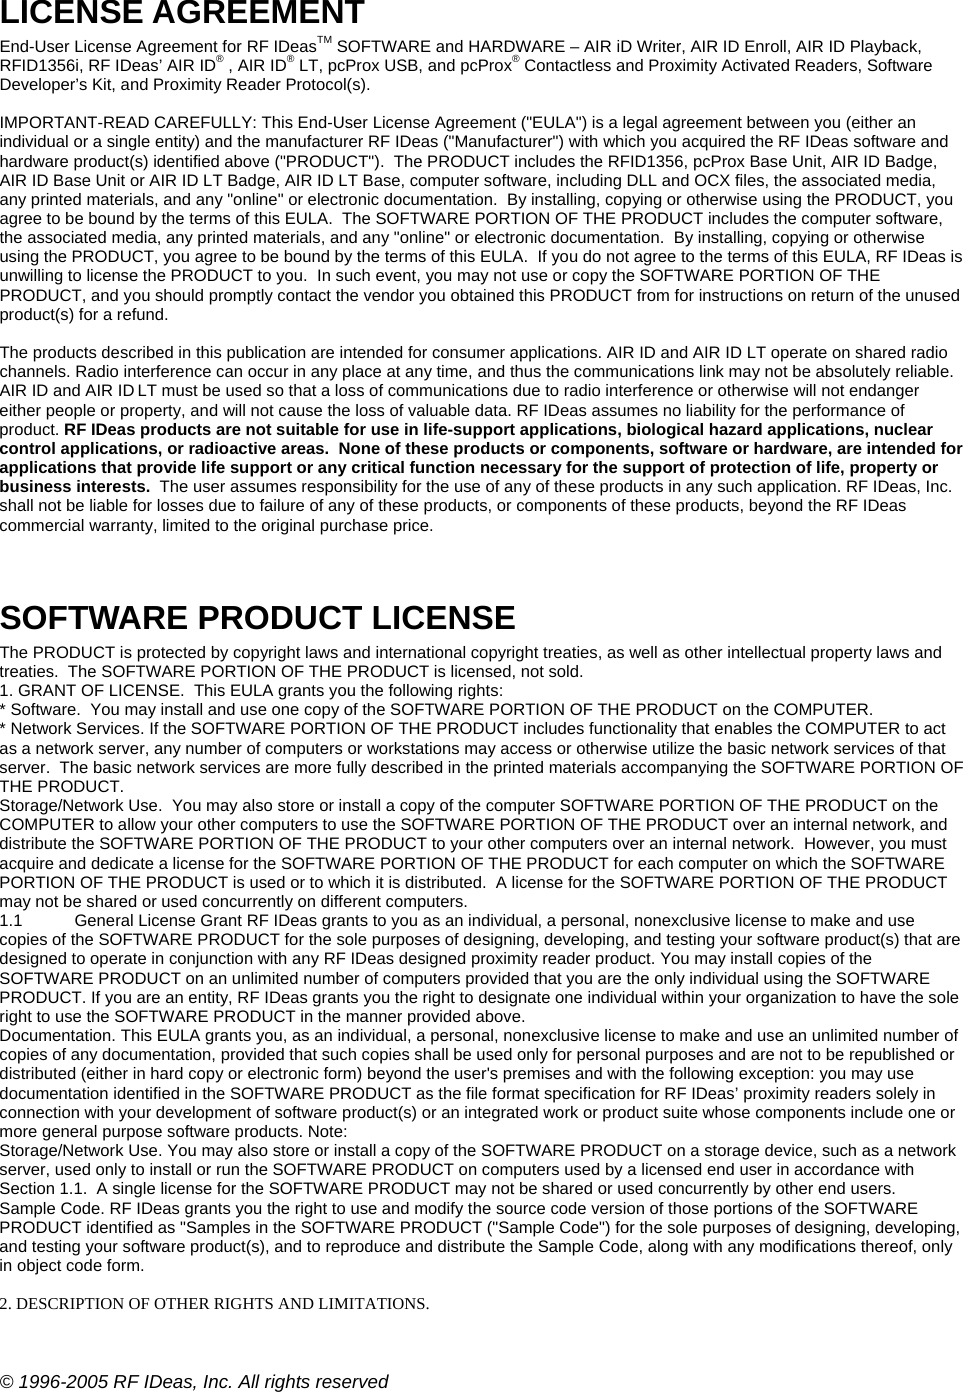 © 1996-2005 RF IDeas, Inc. All rights reserved LICENSE AGREEMENT  End-User License Agreement for RF IDeasTM SOFTWARE and HARDWARE – AIR iD Writer, AIR ID Enroll, AIR ID Playback, RFID1356i, RF IDeas’ AIR ID® , AIR ID® LT, pcProx USB, and pcProx® Contactless and Proximity Activated Readers, Software Developer’s Kit, and Proximity Reader Protocol(s).  IMPORTANT-READ CAREFULLY: This End-User License Agreement (&quot;EULA&quot;) is a legal agreement between you (either an individual or a single entity) and the manufacturer RF IDeas (&quot;Manufacturer&quot;) with which you acquired the RF IDeas software and hardware product(s) identified above (&quot;PRODUCT&quot;).  The PRODUCT includes the RFID1356, pcProx Base Unit, AIR ID Badge, AIR ID Base Unit or AIR ID LT Badge, AIR ID LT Base, computer software, including DLL and OCX files, the associated media, any printed materials, and any &quot;online&quot; or electronic documentation.  By installing, copying or otherwise using the PRODUCT, you agree to be bound by the terms of this EULA.  The SOFTWARE PORTION OF THE PRODUCT includes the computer software, the associated media, any printed materials, and any &quot;online&quot; or electronic documentation.  By installing, copying or otherwise using the PRODUCT, you agree to be bound by the terms of this EULA.  If you do not agree to the terms of this EULA, RF IDeas is unwilling to license the PRODUCT to you.  In such event, you may not use or copy the SOFTWARE PORTION OF THE PRODUCT, and you should promptly contact the vendor you obtained this PRODUCT from for instructions on return of the unused product(s) for a refund.  The products described in this publication are intended for consumer applications. AIR ID and AIR ID LT operate on shared radio channels. Radio interference can occur in any place at any time, and thus the communications link may not be absolutely reliable. AIR ID and AIR ID LT must be used so that a loss of communications due to radio interference or otherwise will not endanger either people or property, and will not cause the loss of valuable data. RF IDeas assumes no liability for the performance of product. RF IDeas products are not suitable for use in life-support applications, biological hazard applications, nuclear control applications, or radioactive areas.  None of these products or components, software or hardware, are intended for applications that provide life support or any critical function necessary for the support of protection of life, property or business interests.  The user assumes responsibility for the use of any of these products in any such application. RF IDeas, Inc. shall not be liable for losses due to failure of any of these products, or components of these products, beyond the RF IDeas commercial warranty, limited to the original purchase price.   SOFTWARE PRODUCT LICENSE The PRODUCT is protected by copyright laws and international copyright treaties, as well as other intellectual property laws and treaties.  The SOFTWARE PORTION OF THE PRODUCT is licensed, not sold. 1. GRANT OF LICENSE.  This EULA grants you the following rights:  * Software.  You may install and use one copy of the SOFTWARE PORTION OF THE PRODUCT on the COMPUTER. * Network Services. If the SOFTWARE PORTION OF THE PRODUCT includes functionality that enables the COMPUTER to act as a network server, any number of computers or workstations may access or otherwise utilize the basic network services of that server.  The basic network services are more fully described in the printed materials accompanying the SOFTWARE PORTION OF THE PRODUCT. Storage/Network Use.  You may also store or install a copy of the computer SOFTWARE PORTION OF THE PRODUCT on the COMPUTER to allow your other computers to use the SOFTWARE PORTION OF THE PRODUCT over an internal network, and distribute the SOFTWARE PORTION OF THE PRODUCT to your other computers over an internal network.  However, you must acquire and dedicate a license for the SOFTWARE PORTION OF THE PRODUCT for each computer on which the SOFTWARE PORTION OF THE PRODUCT is used or to which it is distributed.  A license for the SOFTWARE PORTION OF THE PRODUCT may not be shared or used concurrently on different computers. 1.1  General License Grant RF IDeas grants to you as an individual, a personal, nonexclusive license to make and use copies of the SOFTWARE PRODUCT for the sole purposes of designing, developing, and testing your software product(s) that are designed to operate in conjunction with any RF IDeas designed proximity reader product. You may install copies of the SOFTWARE PRODUCT on an unlimited number of computers provided that you are the only individual using the SOFTWARE PRODUCT. If you are an entity, RF IDeas grants you the right to designate one individual within your organization to have the sole right to use the SOFTWARE PRODUCT in the manner provided above. Documentation. This EULA grants you, as an individual, a personal, nonexclusive license to make and use an unlimited number of copies of any documentation, provided that such copies shall be used only for personal purposes and are not to be republished or distributed (either in hard copy or electronic form) beyond the user&apos;s premises and with the following exception: you may use documentation identified in the SOFTWARE PRODUCT as the file format specification for RF IDeas’ proximity readers solely in connection with your development of software product(s) or an integrated work or product suite whose components include one or more general purpose software products. Note:  Storage/Network Use. You may also store or install a copy of the SOFTWARE PRODUCT on a storage device, such as a network server, used only to install or run the SOFTWARE PRODUCT on computers used by a licensed end user in accordance with Section 1.1.  A single license for the SOFTWARE PRODUCT may not be shared or used concurrently by other end users. Sample Code. RF IDeas grants you the right to use and modify the source code version of those portions of the SOFTWARE PRODUCT identified as &quot;Samples in the SOFTWARE PRODUCT (&quot;Sample Code&quot;) for the sole purposes of designing, developing, and testing your software product(s), and to reproduce and distribute the Sample Code, along with any modifications thereof, only in object code form.  2. DESCRIPTION OF OTHER RIGHTS AND LIMITATIONS.   